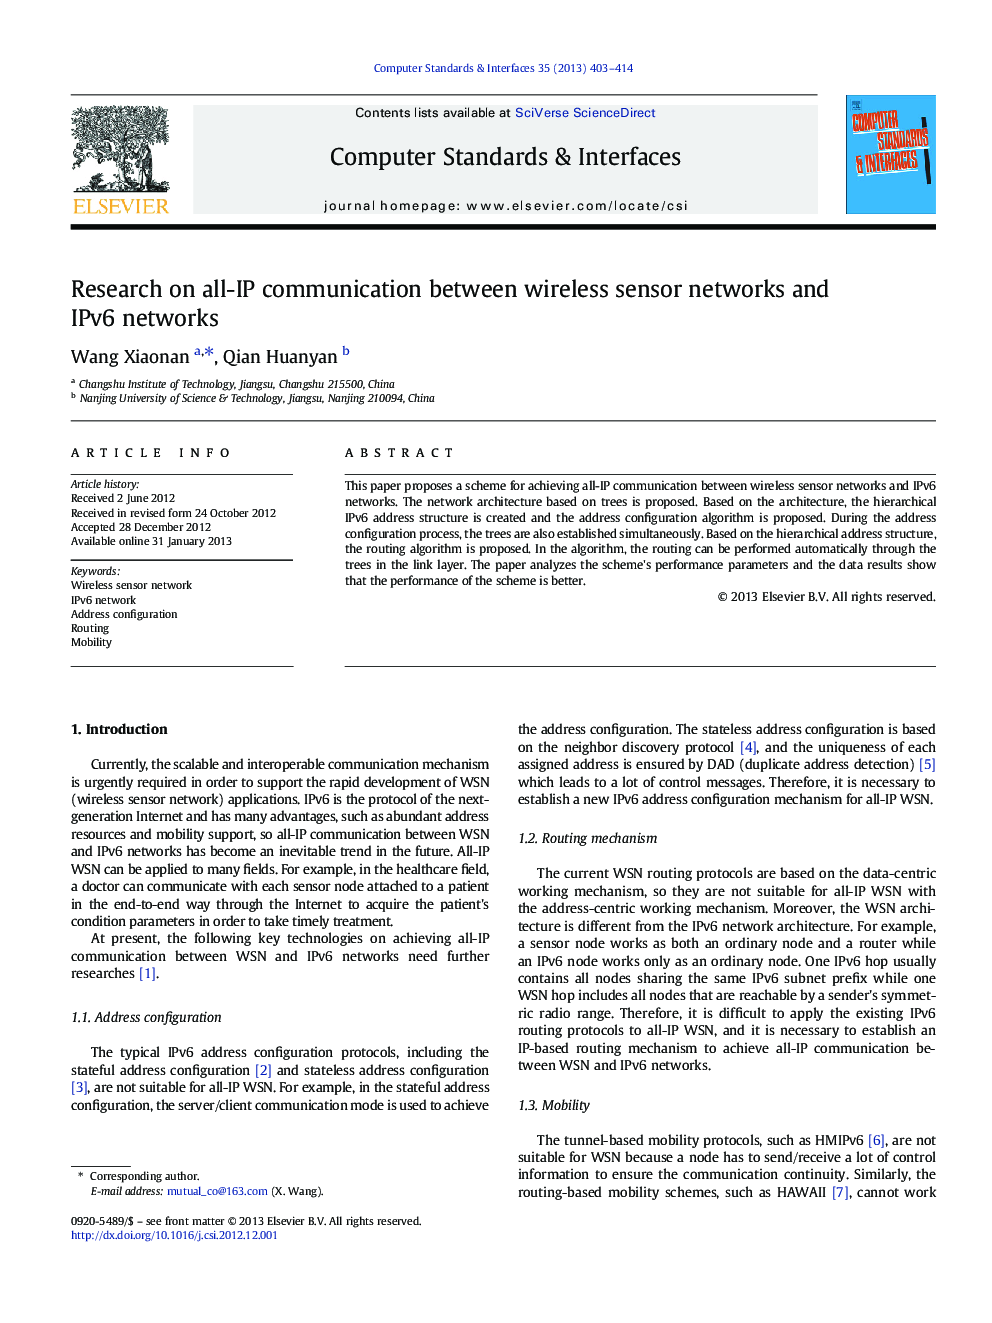 Research on all-IP communication between wireless sensor networks and IPv6 networks